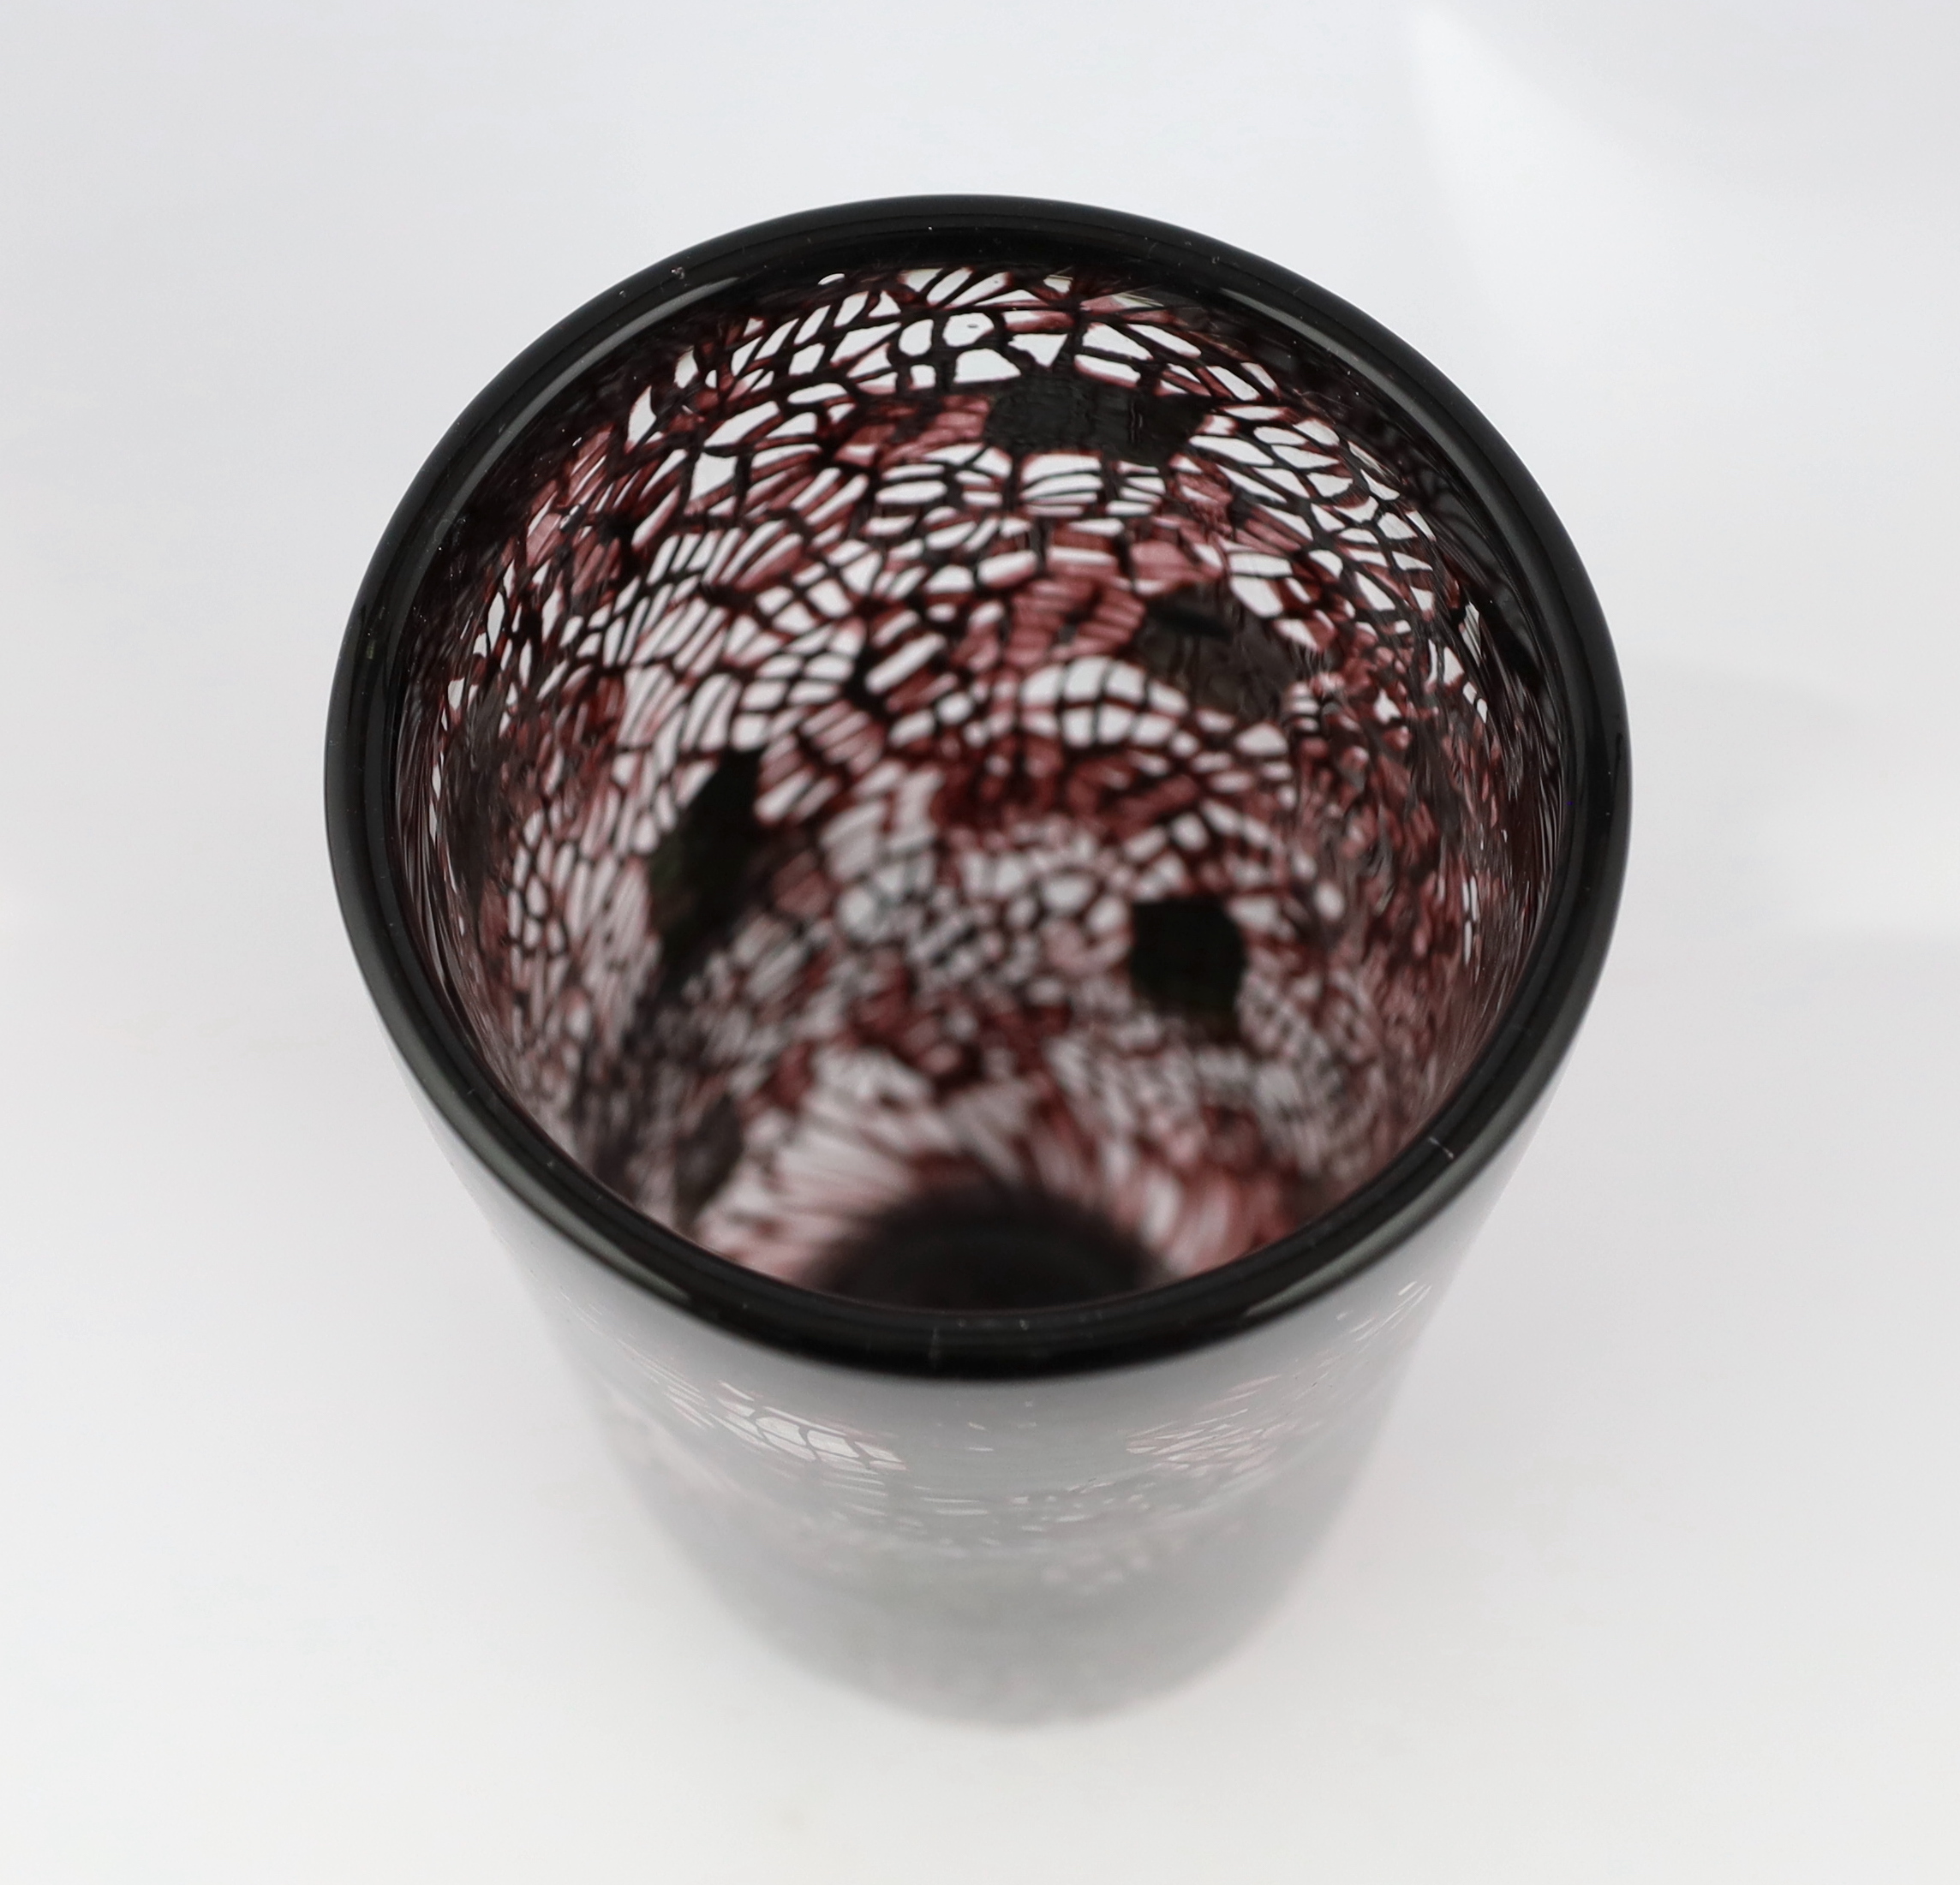 Vittorio Ferro (1932-2012) A Murano glass Murrine vase, in purple and black, unsigned, 34cm, Please note this lot attracts an additional import tax of 20% on the hammer price